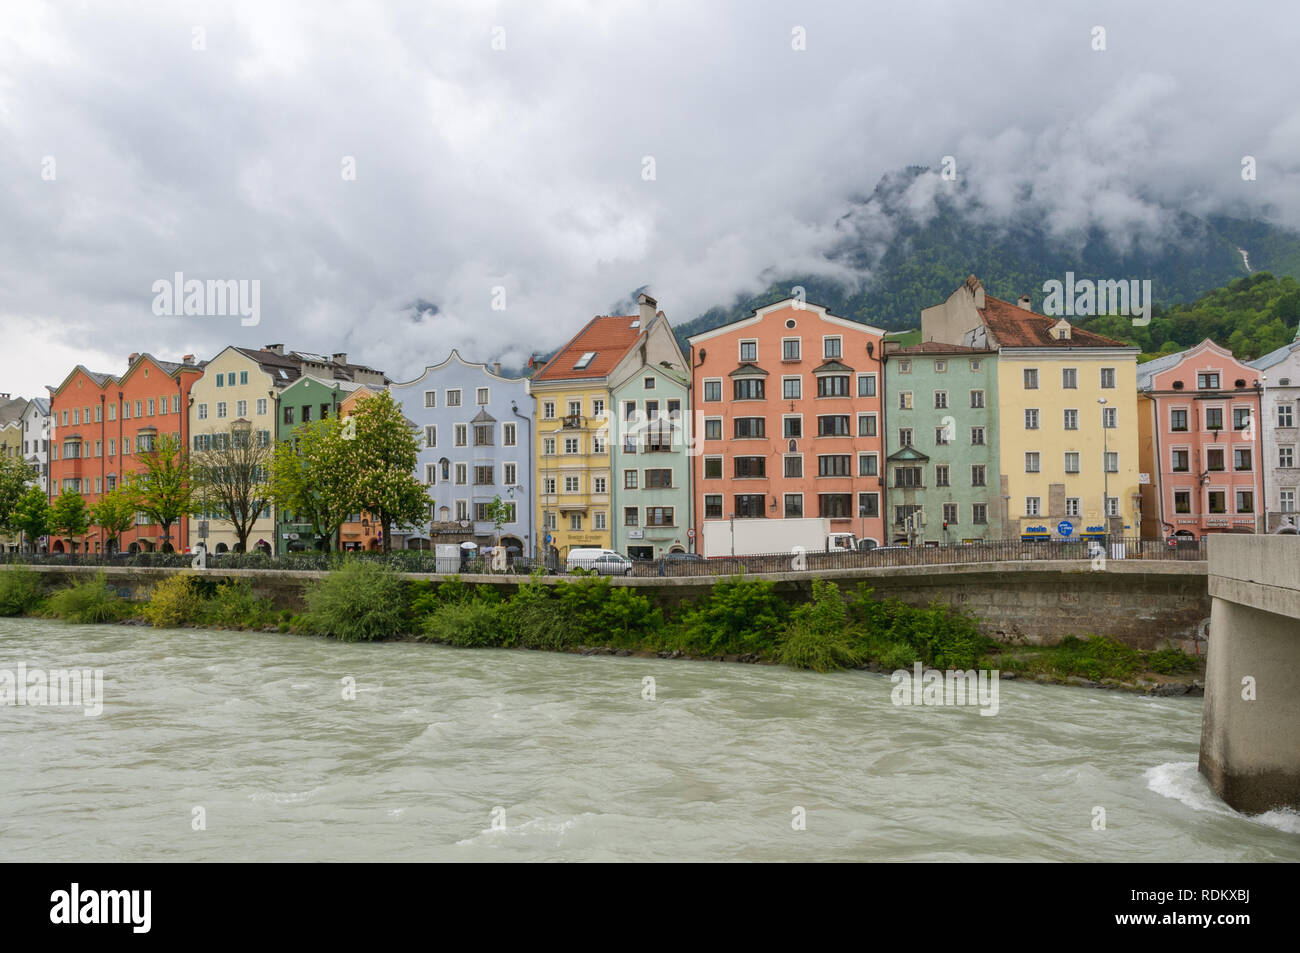 INNSBRUCK, AUSTRIA - MAY 11, 2013: The famous colorful houses at the Mariahilfstrasse near the historic town centre of Innsbruck, Austria on May 11, 2 Stock Photo